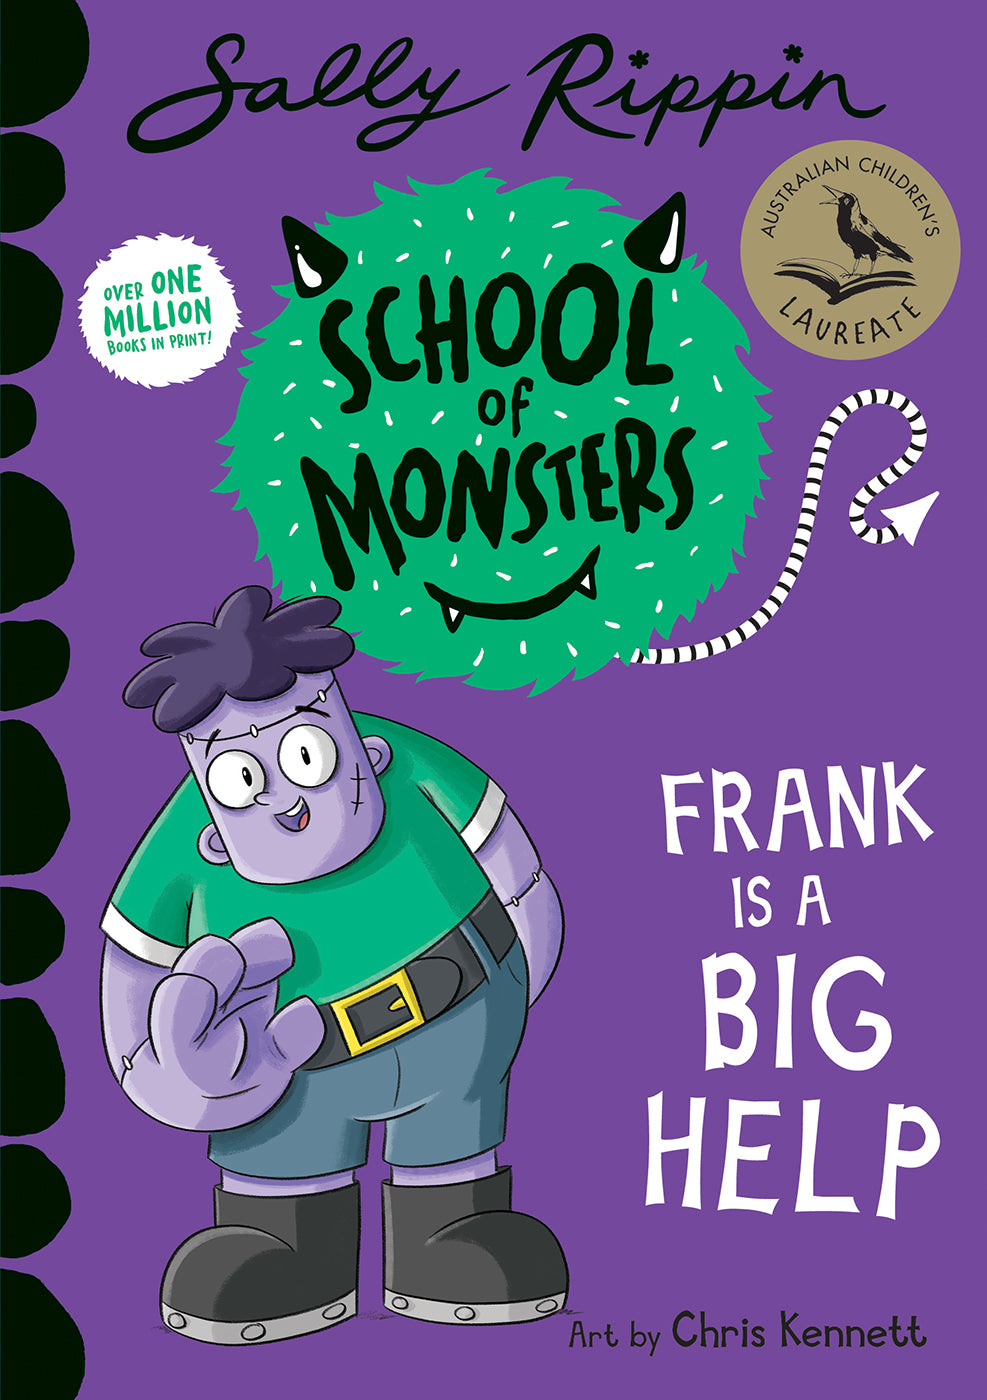 School of Monsters: Frank is a Big Help  by Sally Rippin